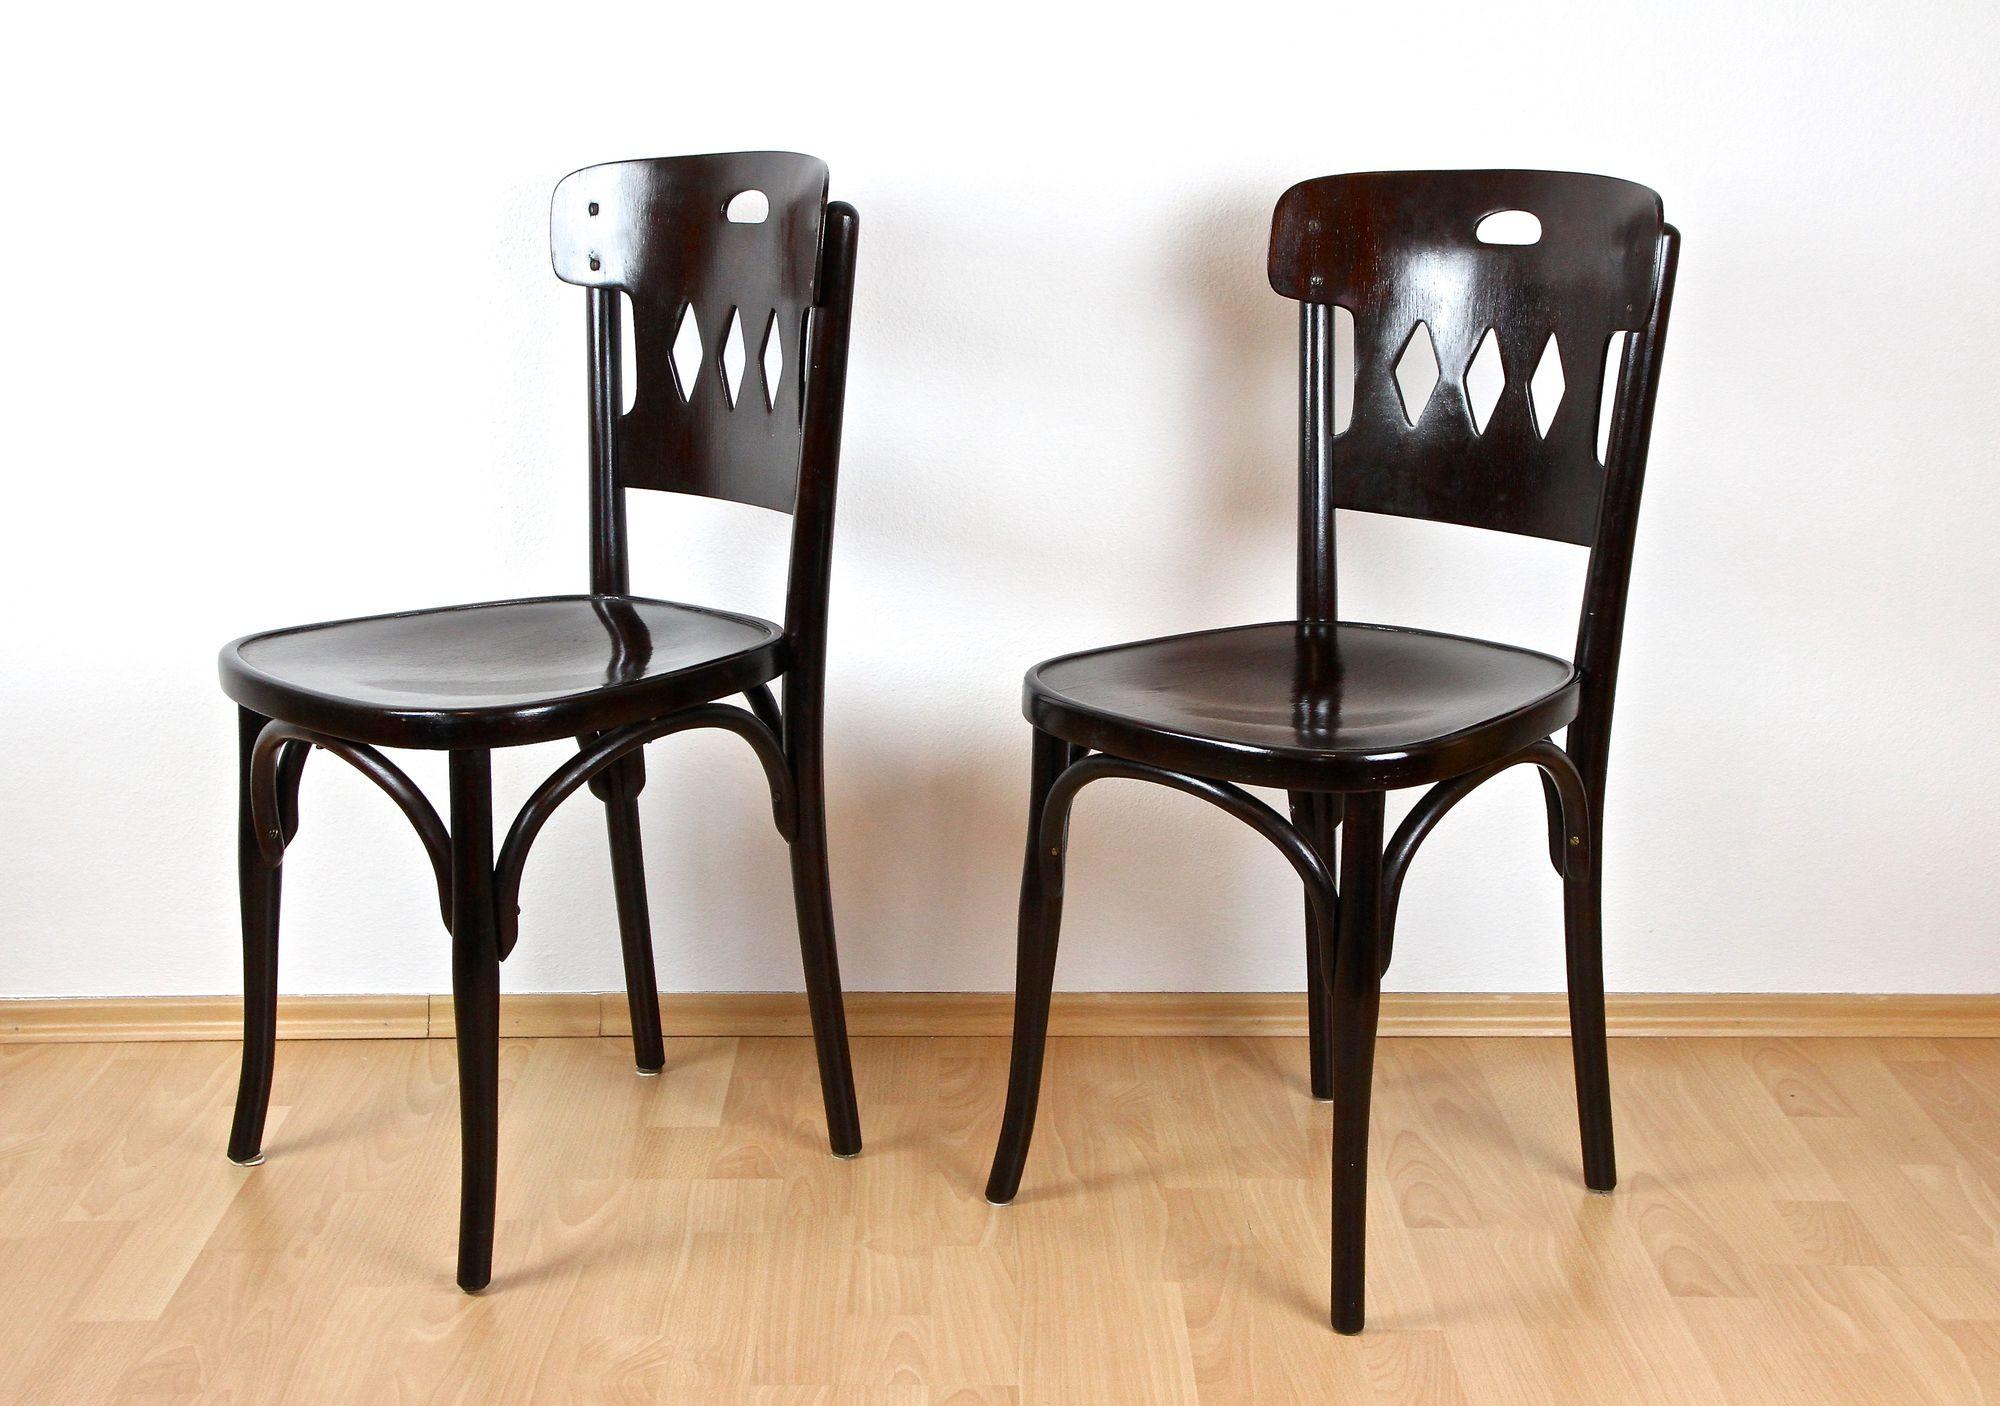 Pair Of Art Nouveau Bentwood Chairs by J&J Kohn, Vienna ca. 1910 For Sale 5